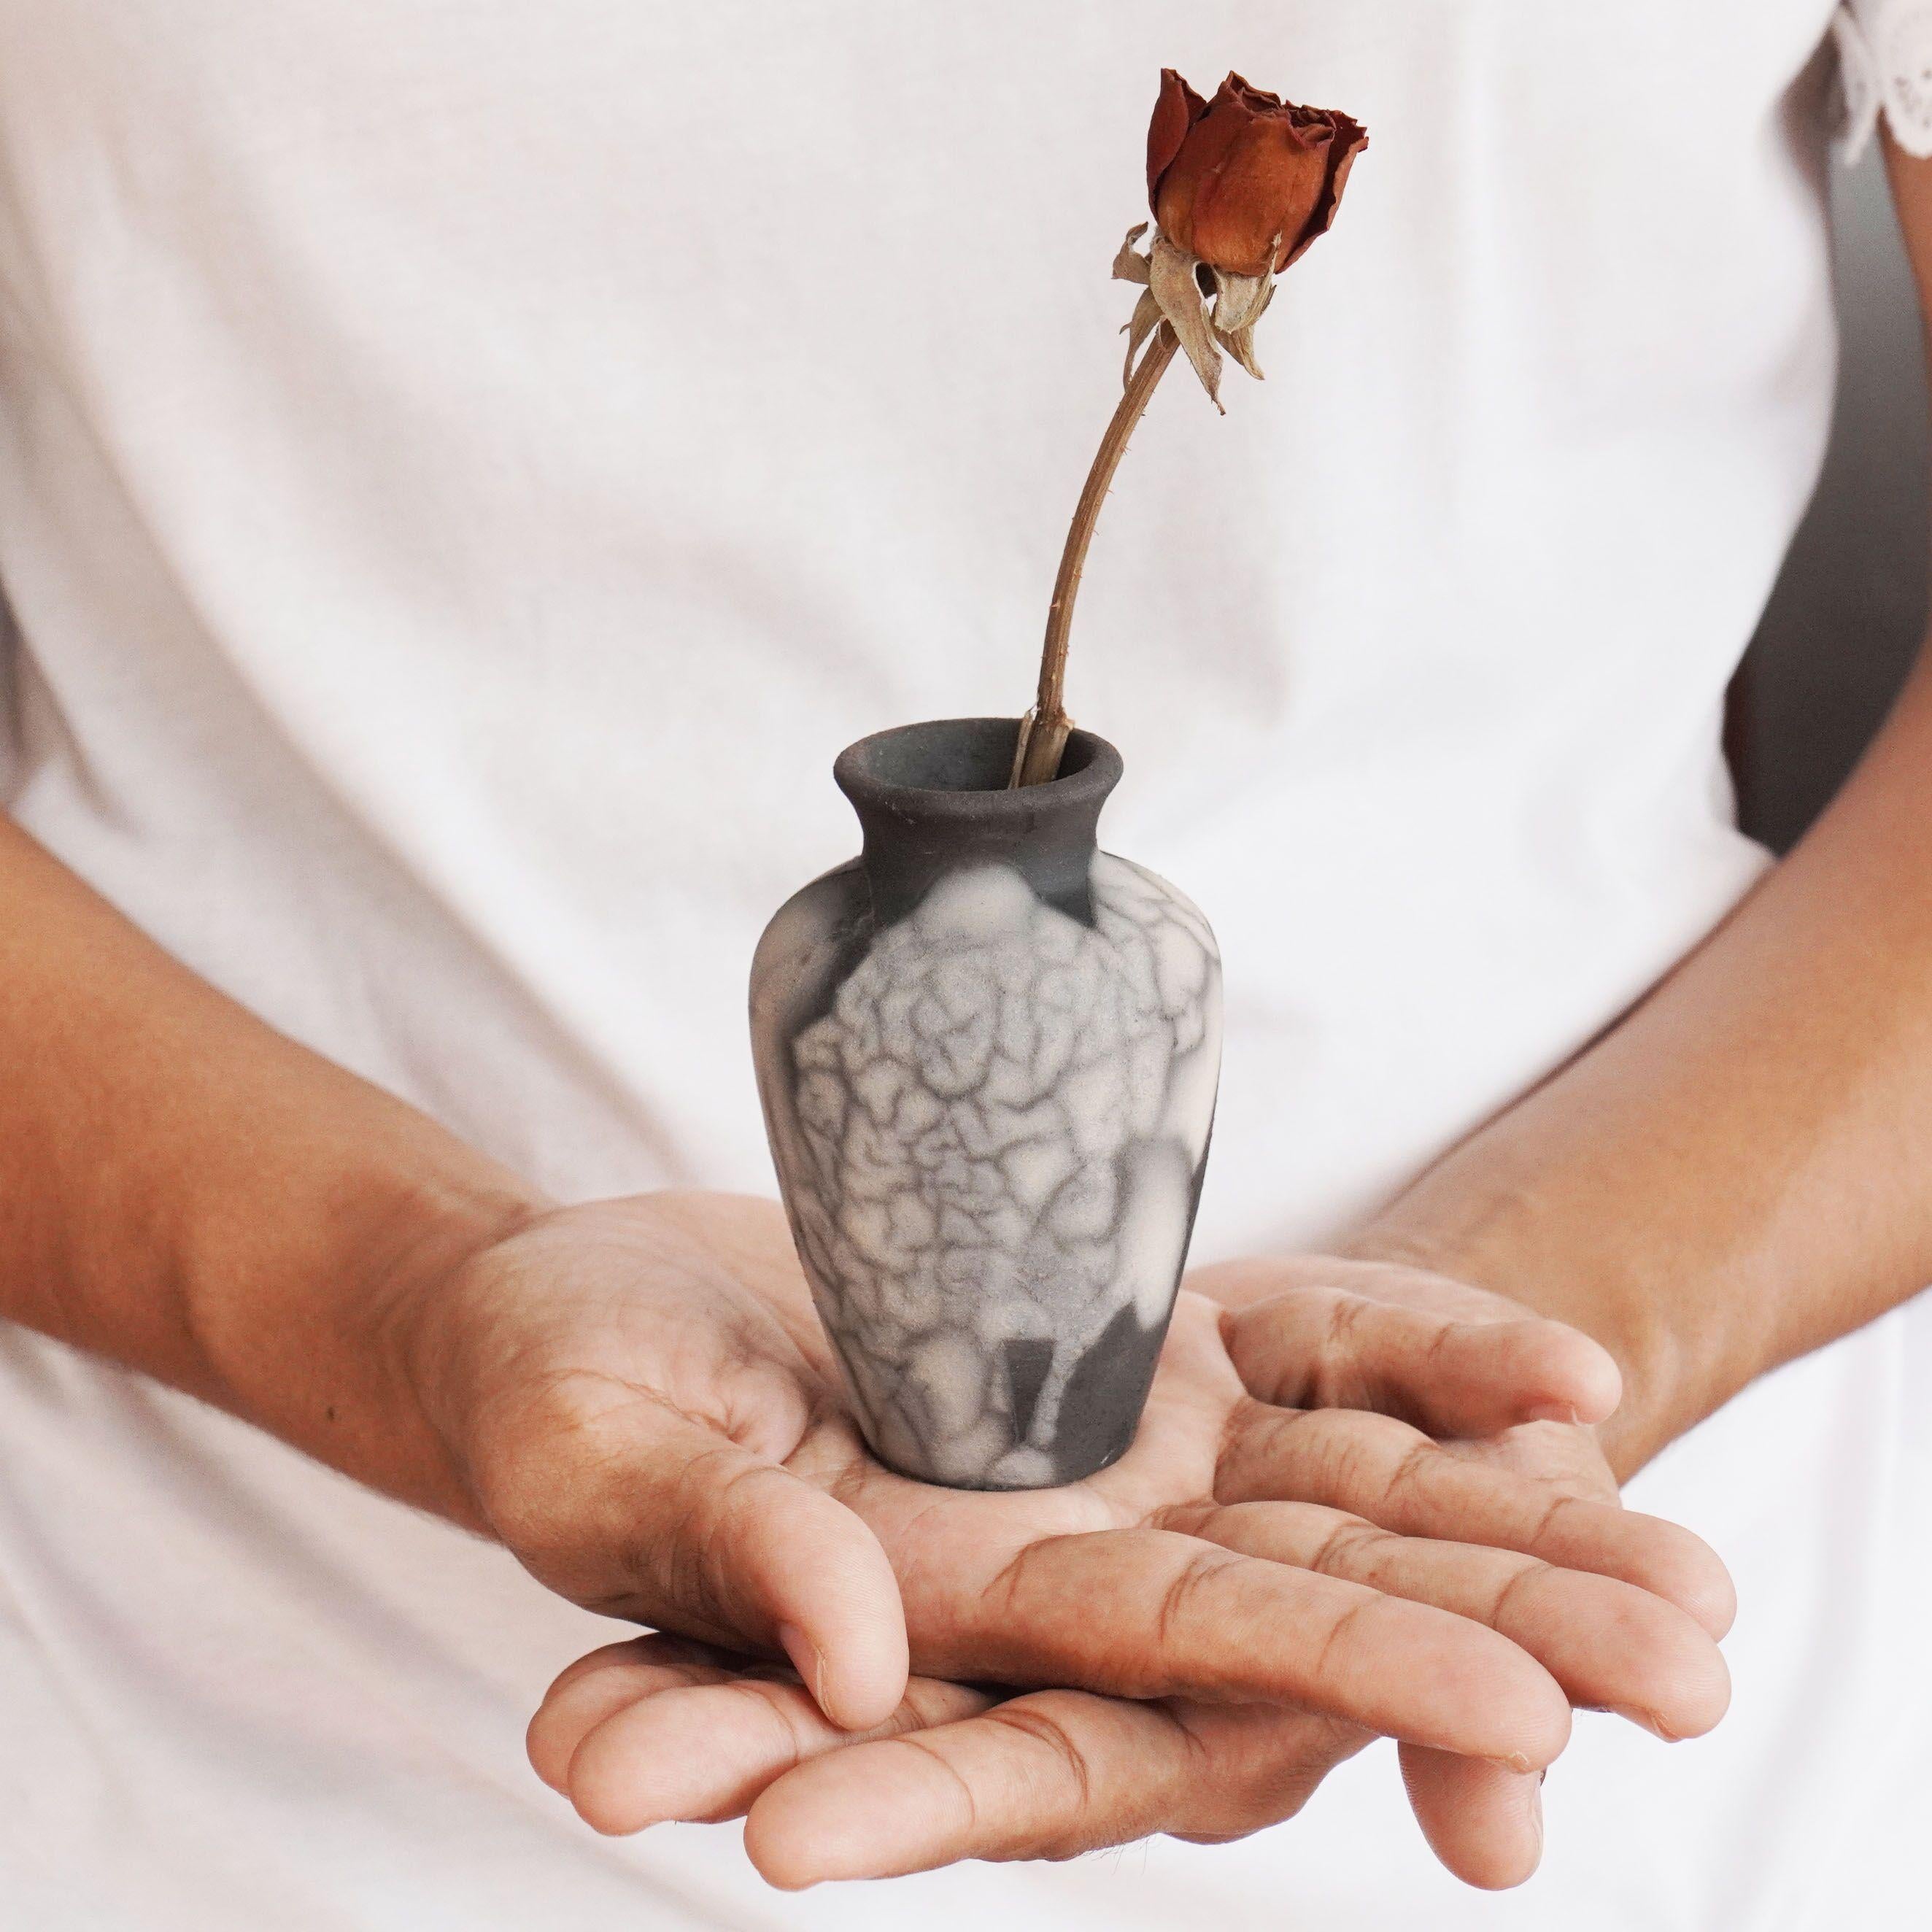 Hana O ~ 花 Flower. 

Our Hana O mini raku vase bears a classical pottery vase shape and is suitable for wide headed single stalk flowers. This vase makes for an adorable gift or a tabletop decorative piece that truly stands out. Each piece is